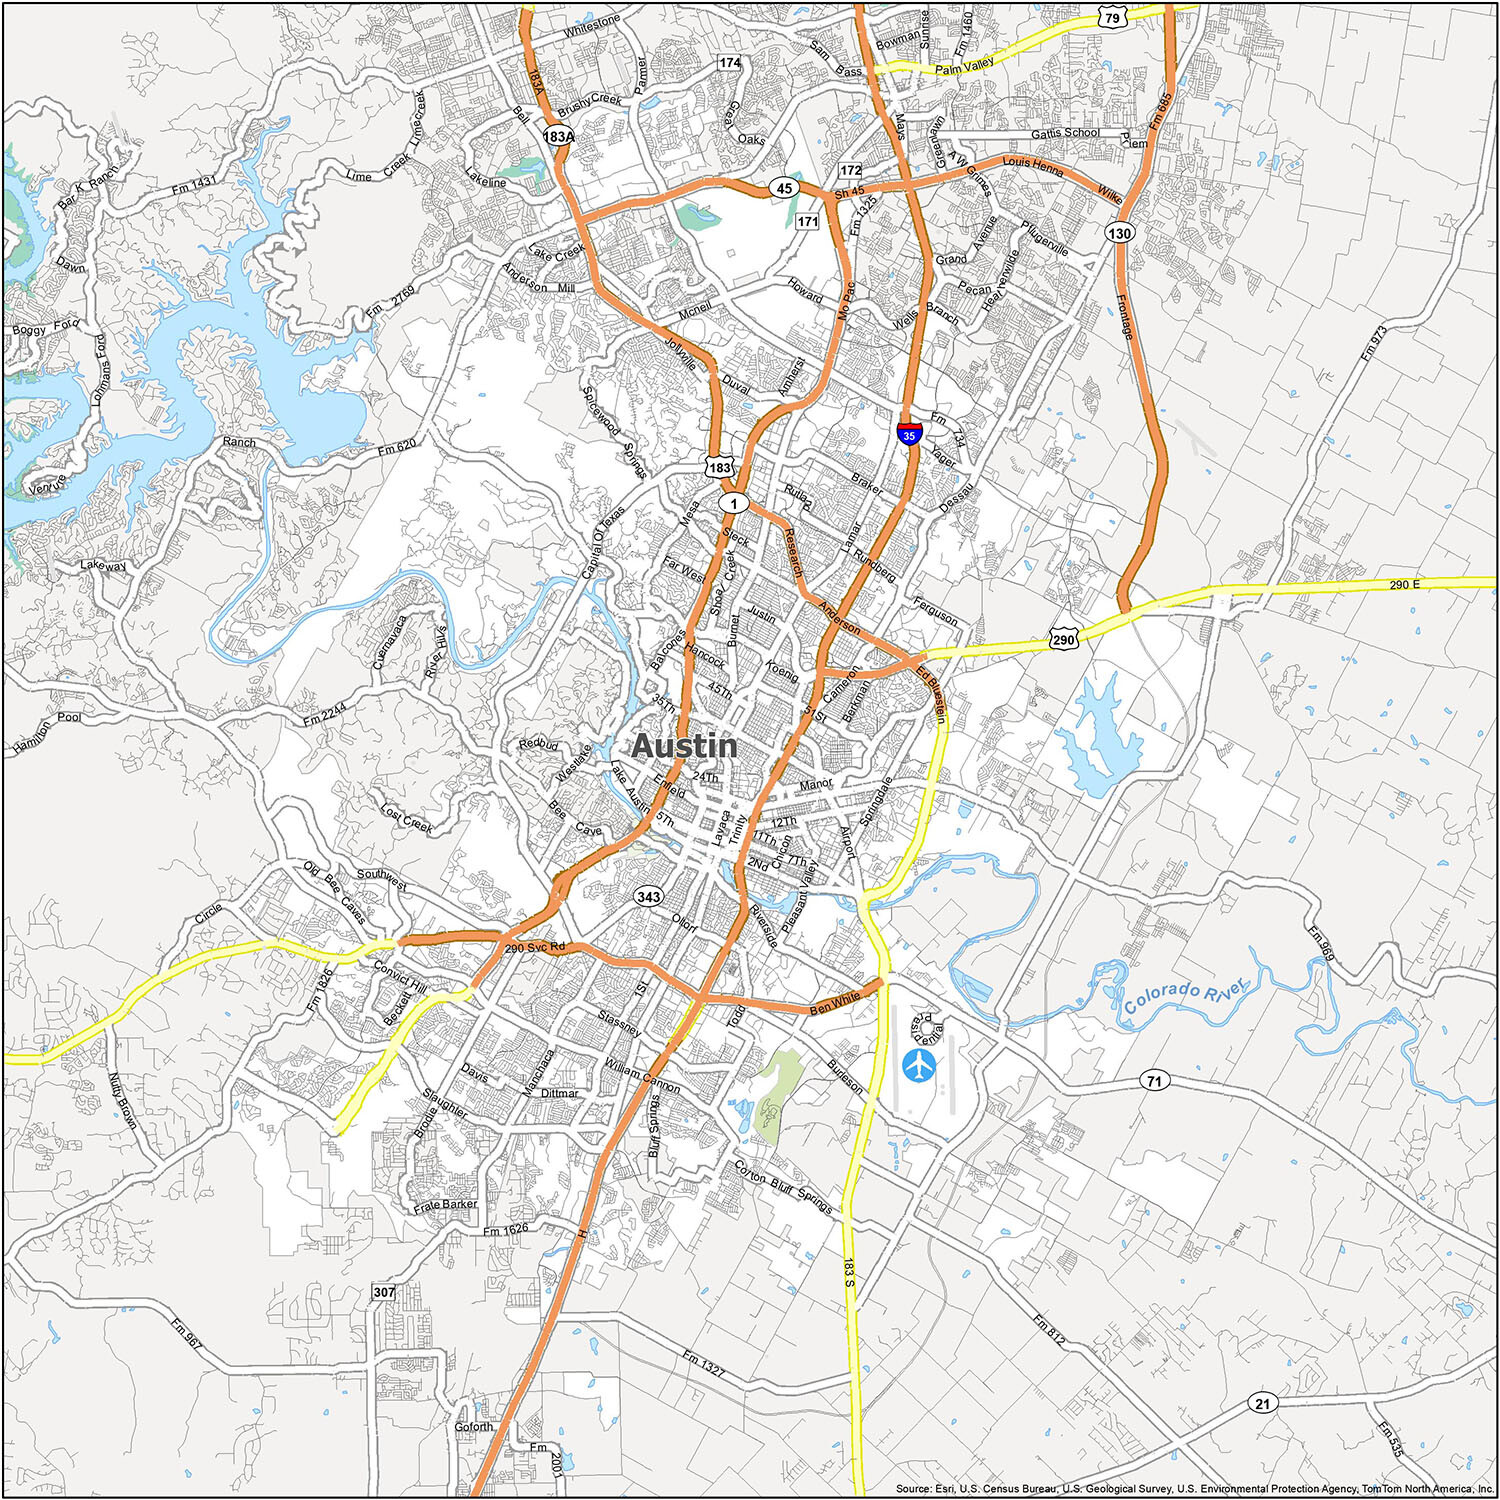  Map  of Austin  Texas  GIS Geography